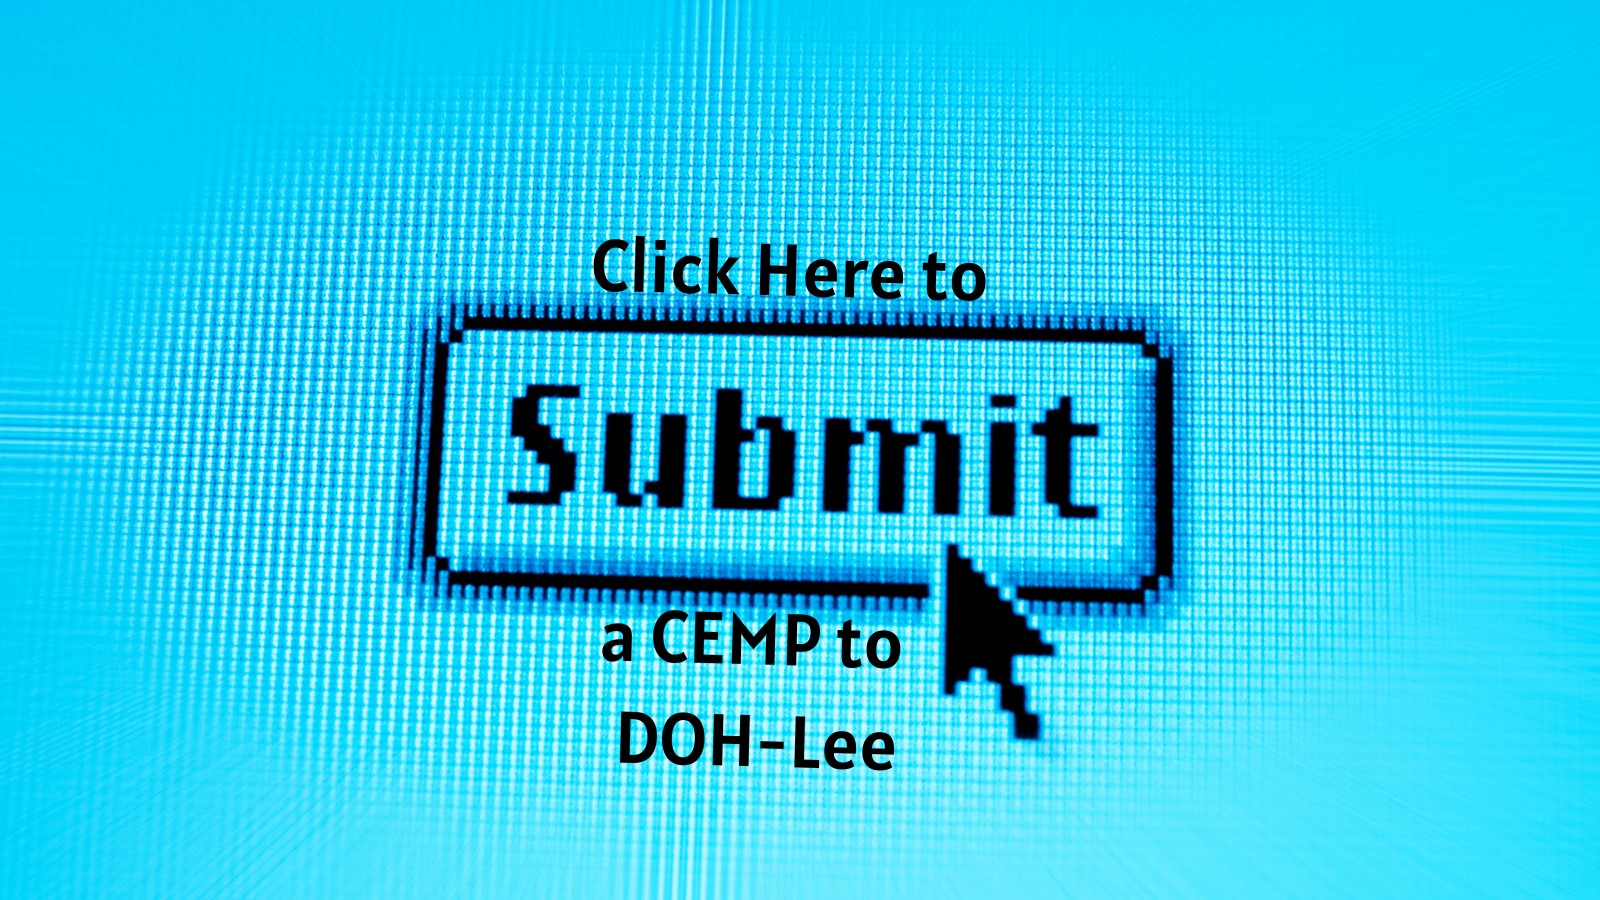 “Click here to submit a CEMP to DOH-Lee”